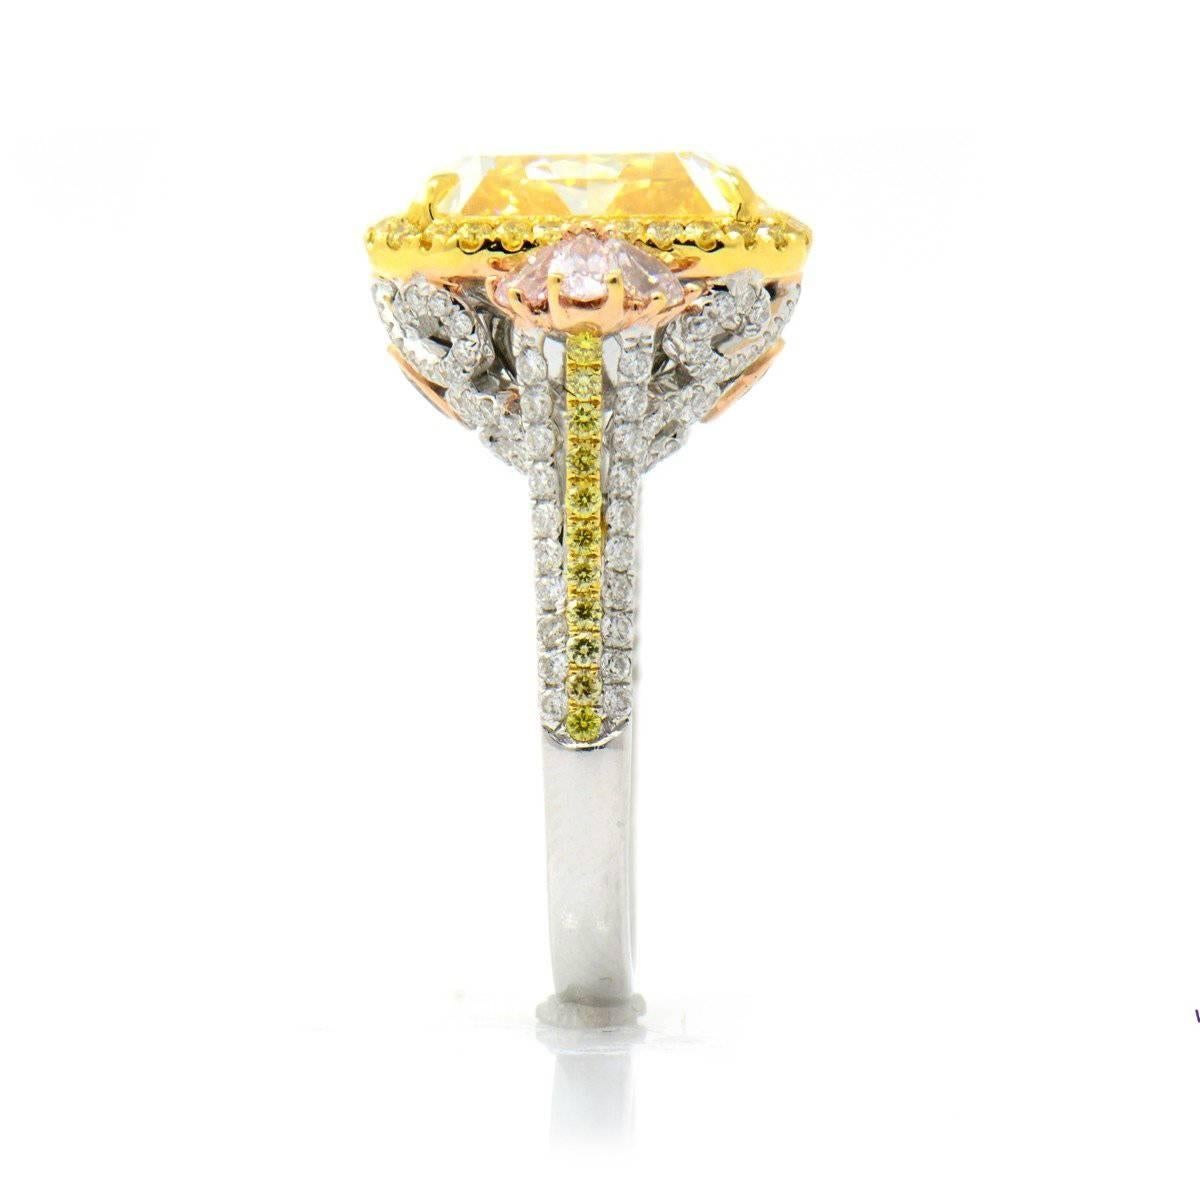 FANCY YELLOW AND PINK DIAMOND RING - 12.77 CT

Set in 18Kt White gold


Total fancy yellow diamond weight: 12.07 ct


[ 1 diamond ]


Color: Natural fancy light yellow


Clarity: VS2


Total ring weight: 11.04 grams


GIA Certified